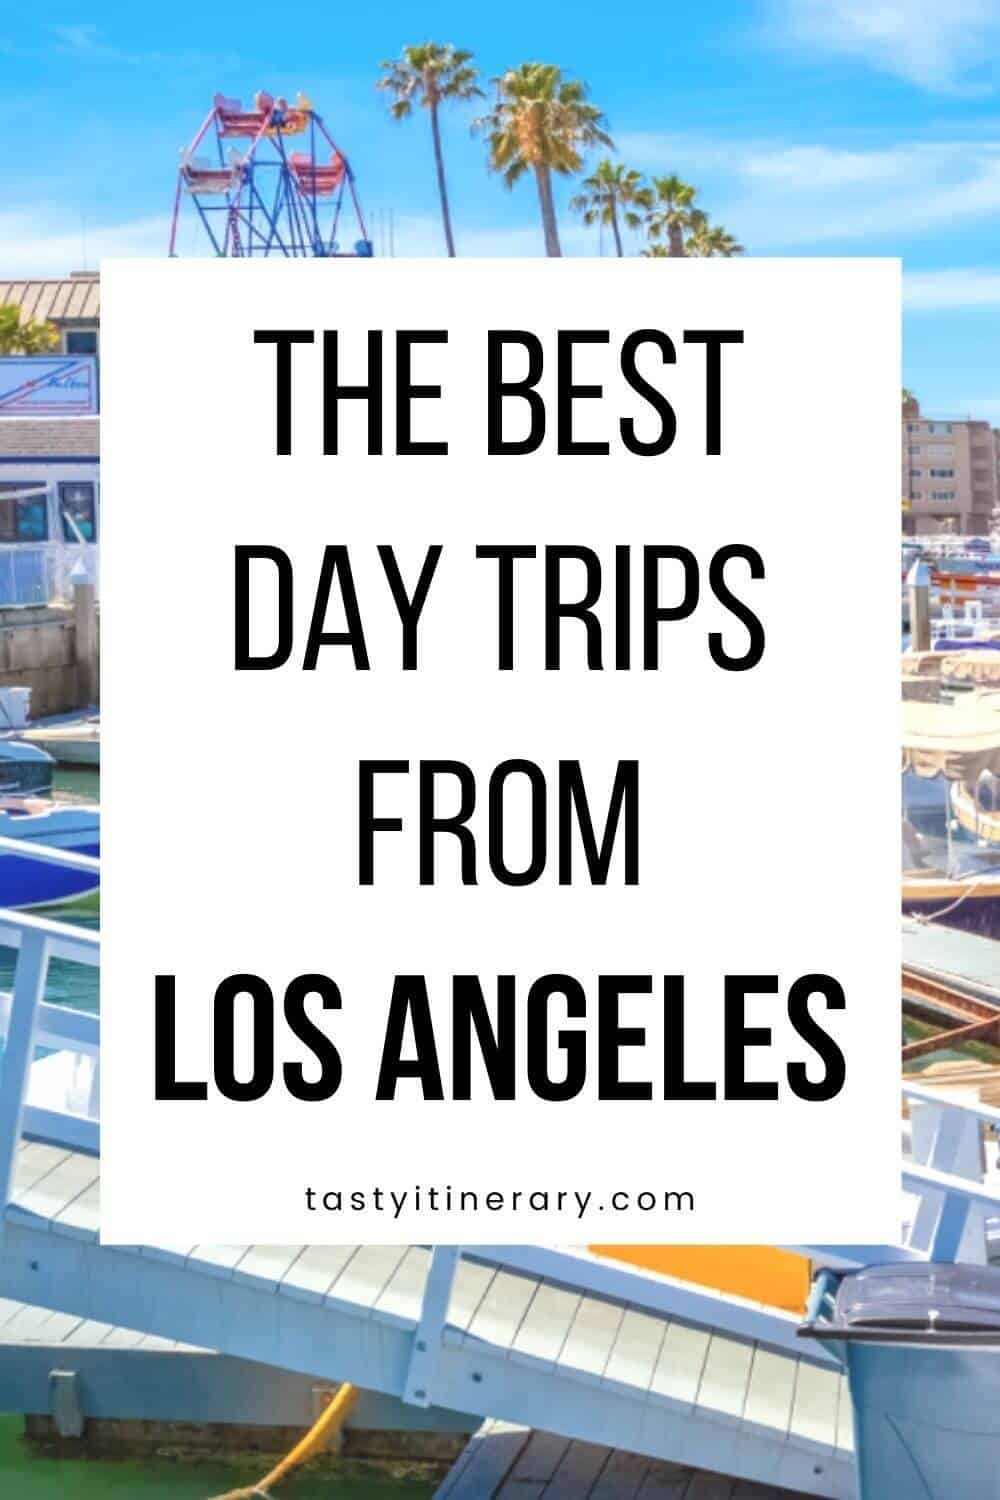 Pinterest Marketing Pin | Best Day Trips from Los Angeles